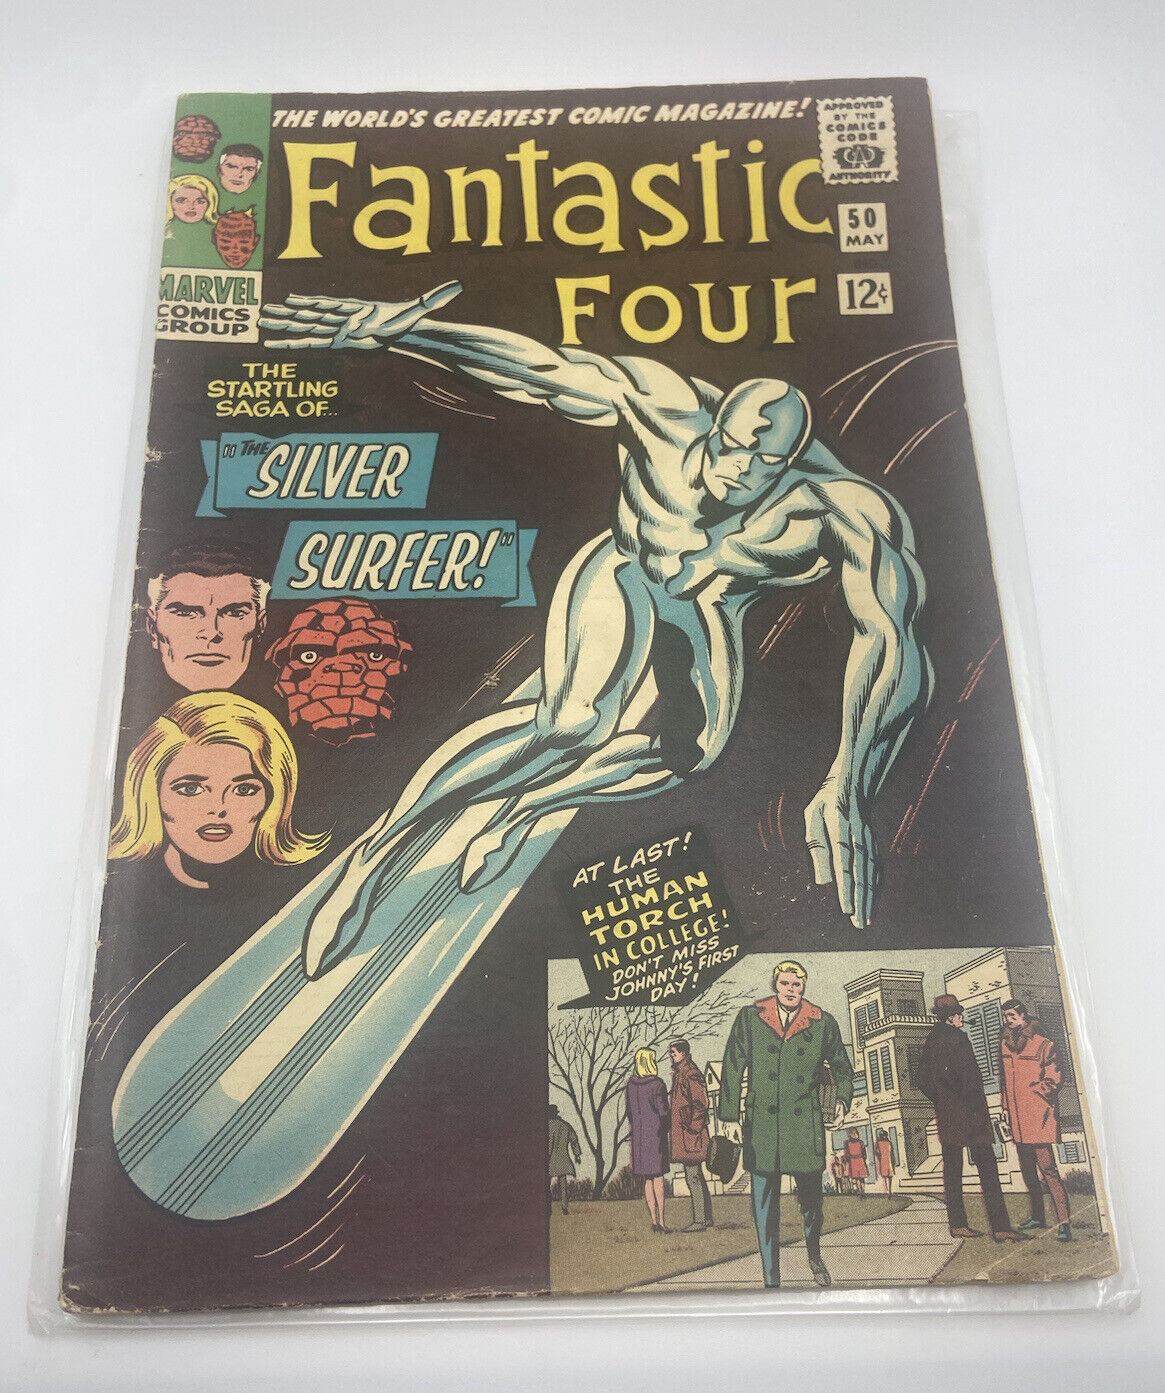 Fantastic Four May #50 1966 Silver Surfer